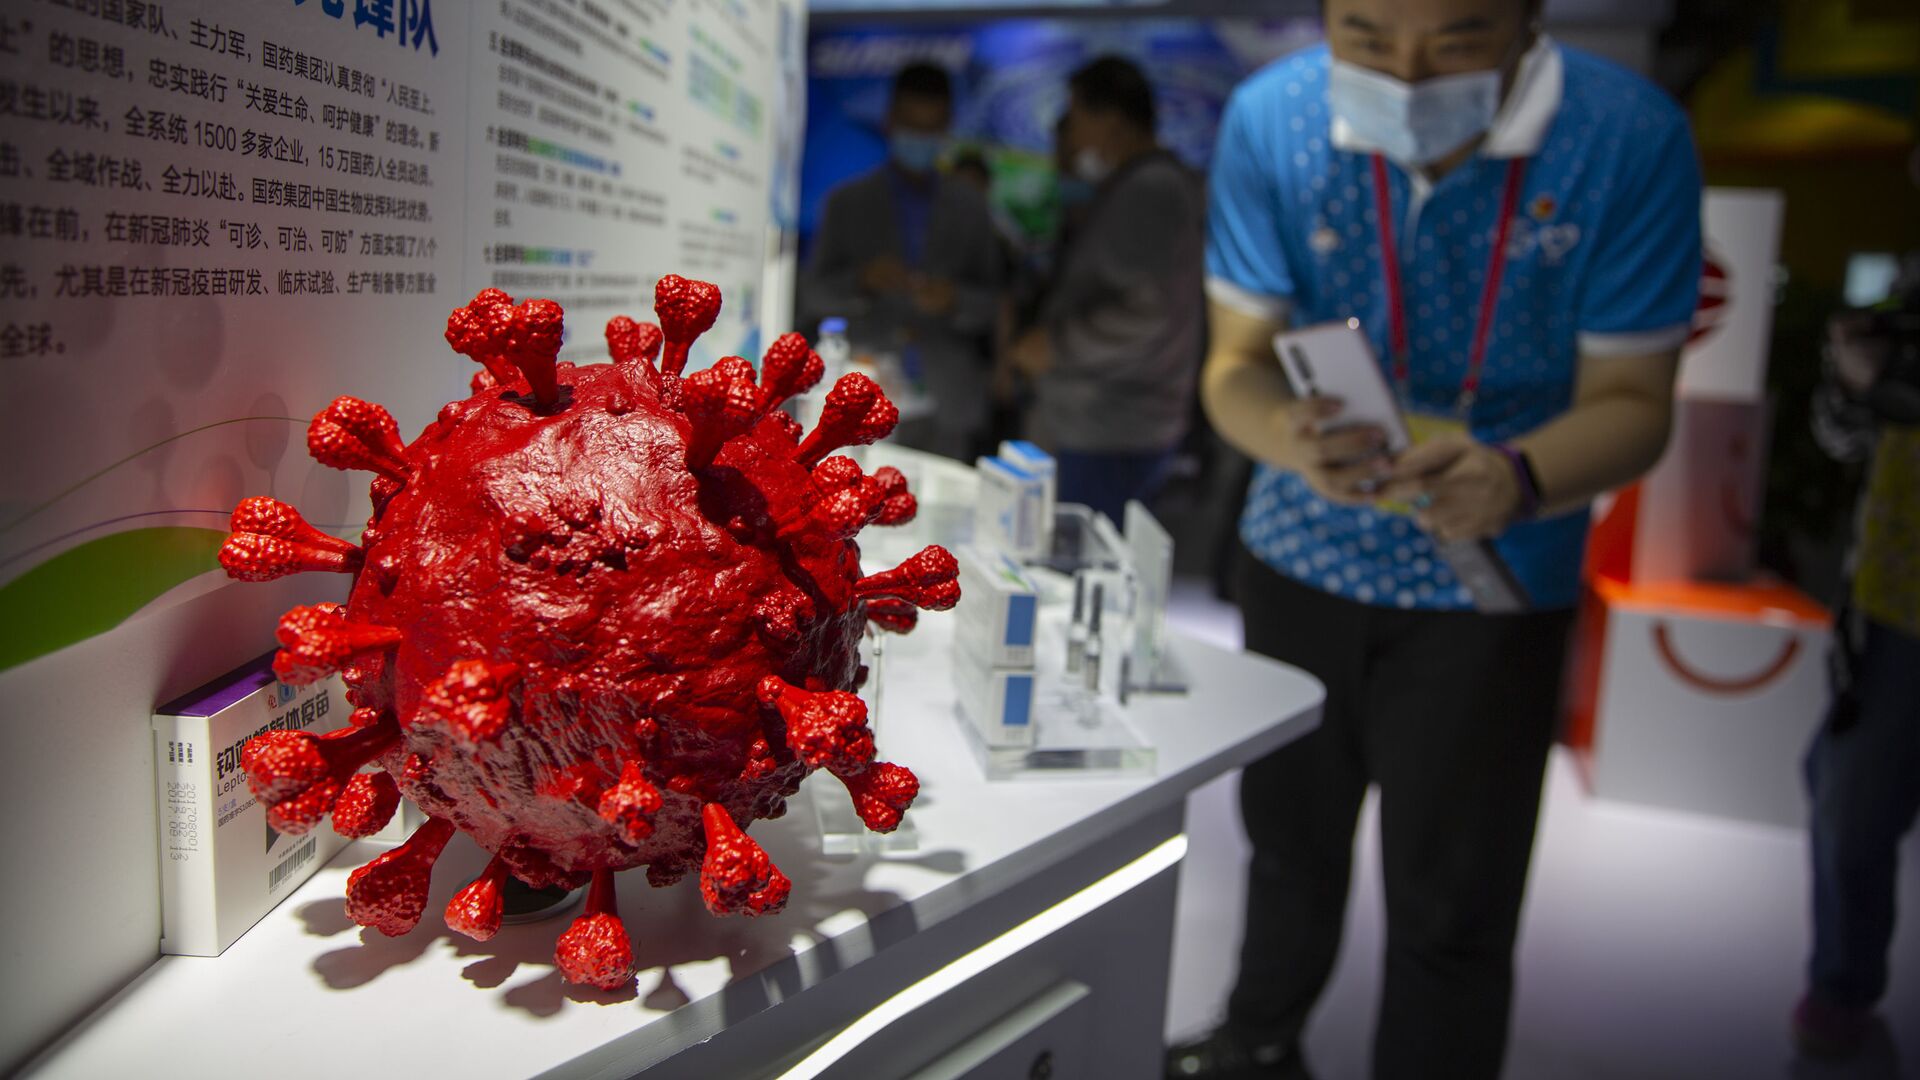 A visitor wearing a face mask takes a photo of a model of a coronavirus and boxes for COVID-19 vaccines at a display by Chinese pharmaceutical firm Sinopharm at the China International Fair for Trade in Services (CIFTIS) in Beijing, Saturday, Sept. 5, 2020. With the COVID-19 pandemic largely under control, China's capital on Saturday kicked off one of the first large-scale public events since the start of the coronavirus outbreak, as tens of thousands of attendees were expected to visit displays from nearly 2,000 Chinese and foreign companies showcasing their products and services. - Sputnik International, 1920, 15.06.2021